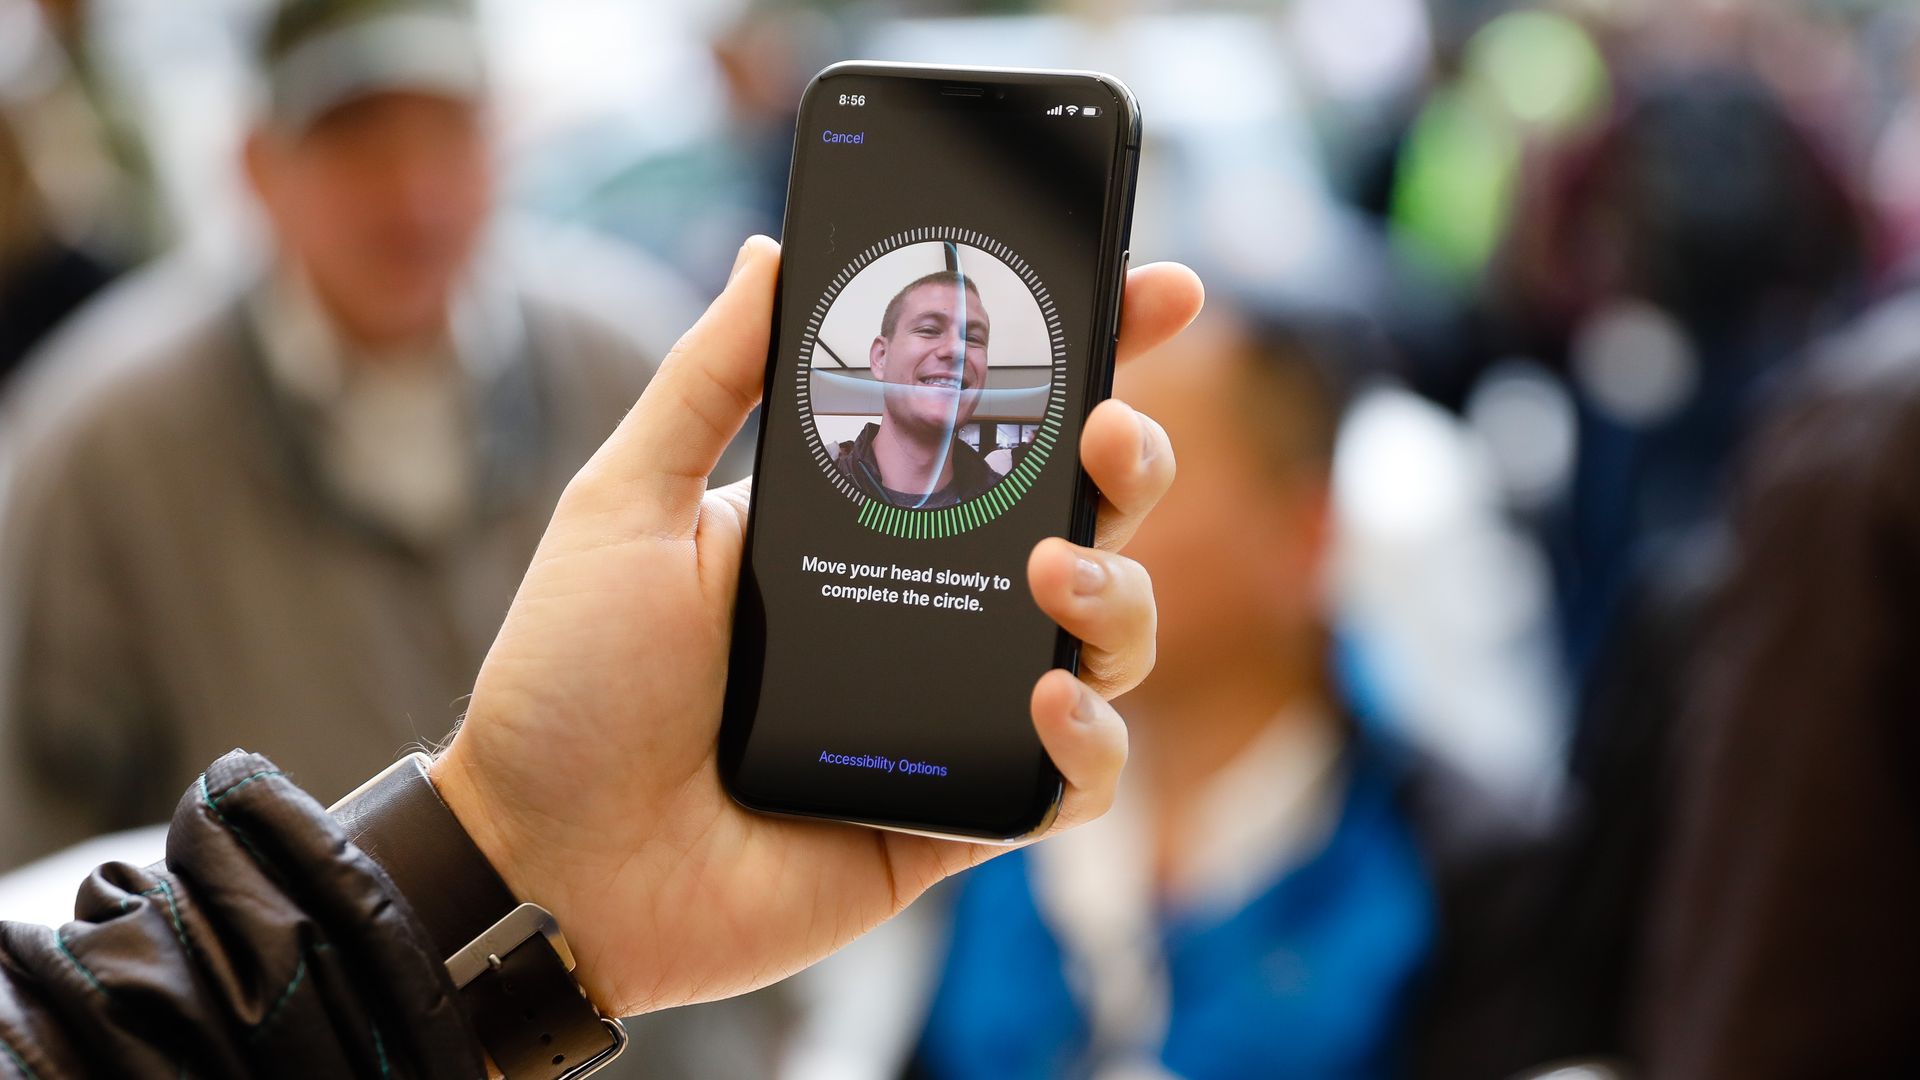 A man uses facial recognition on an iPhone